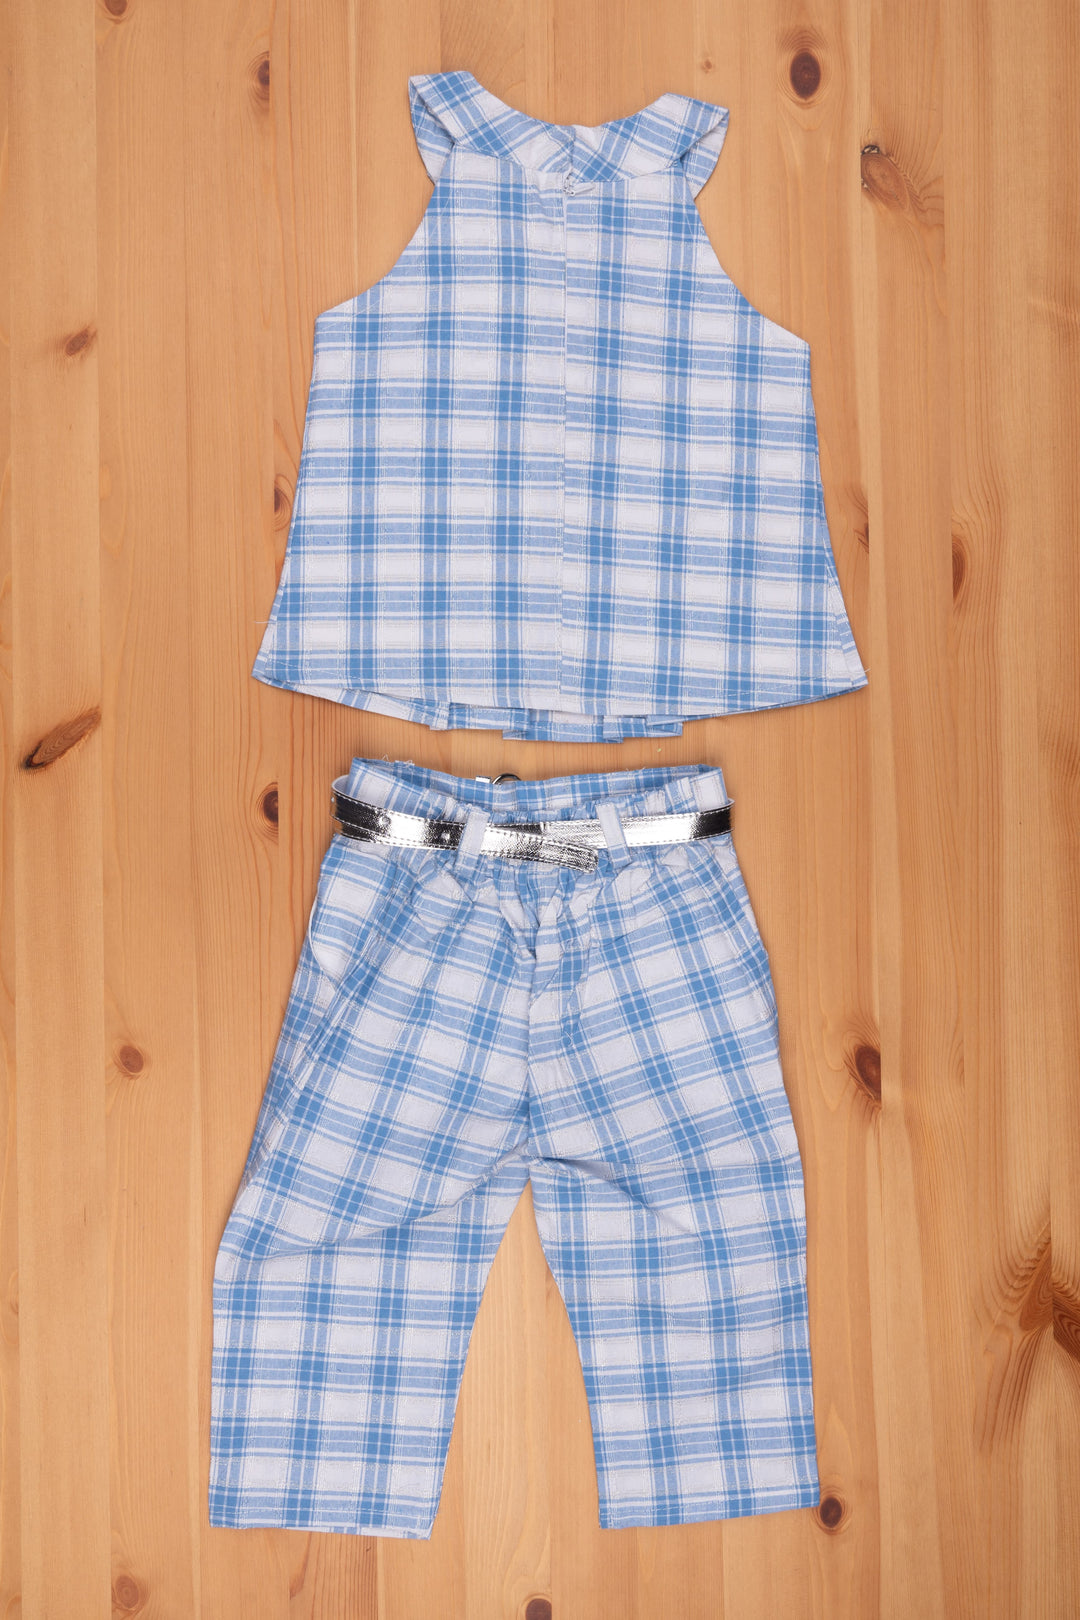 The Nesavu Baby Frock / Jhabla Blue Checkered Halter Top & Pant Set for Young Fashionistas Nesavu Trendy baby frock designs | Baby Frocks Casuals | The Nesavu